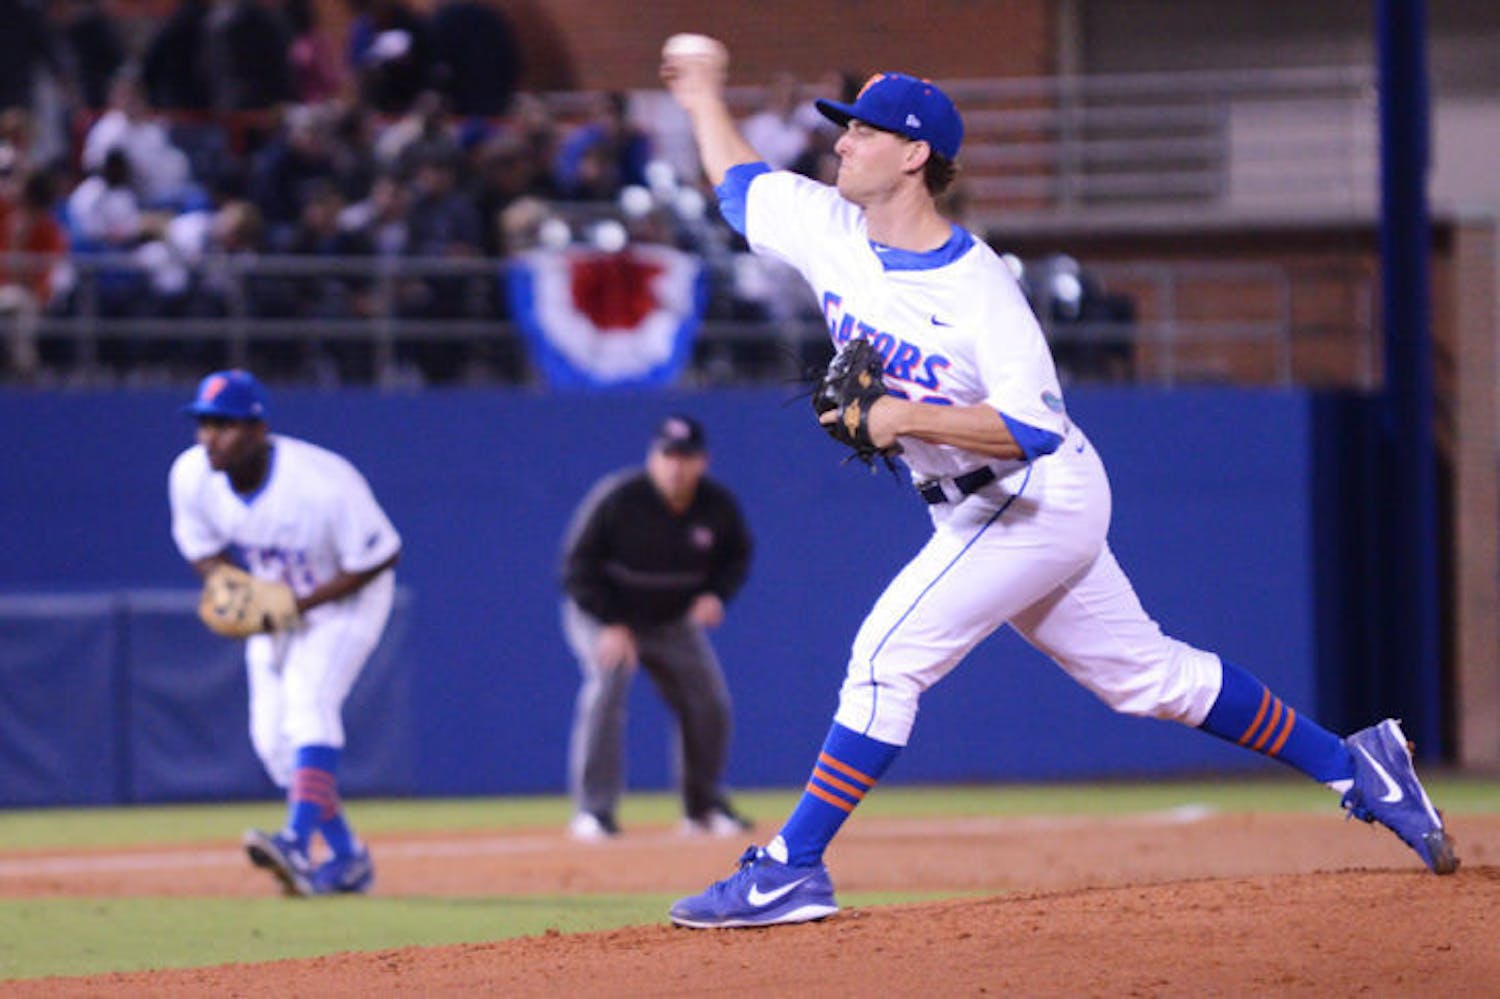 Jonathon Crawford pitches against Florida Gulf Coast on Feb. 22 at McKethan Stadium. Crawford threw a no-hitter against Bethune-Cookman in the first game of the NCAA Regionals last season.